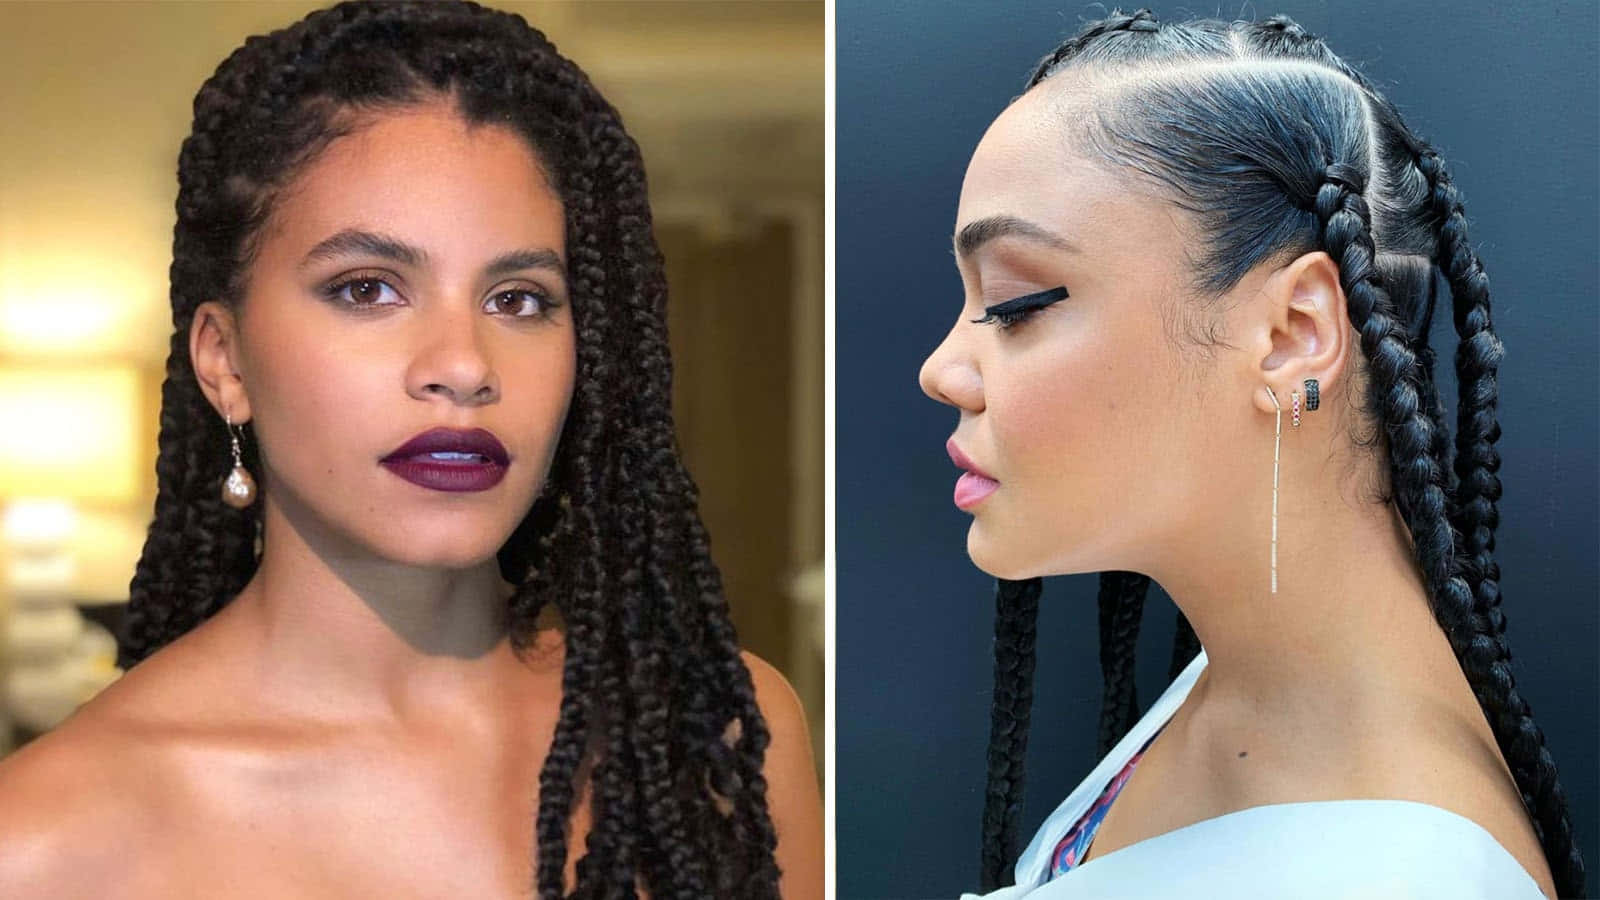 Two Pictures Of Women With Braids And Lipstick